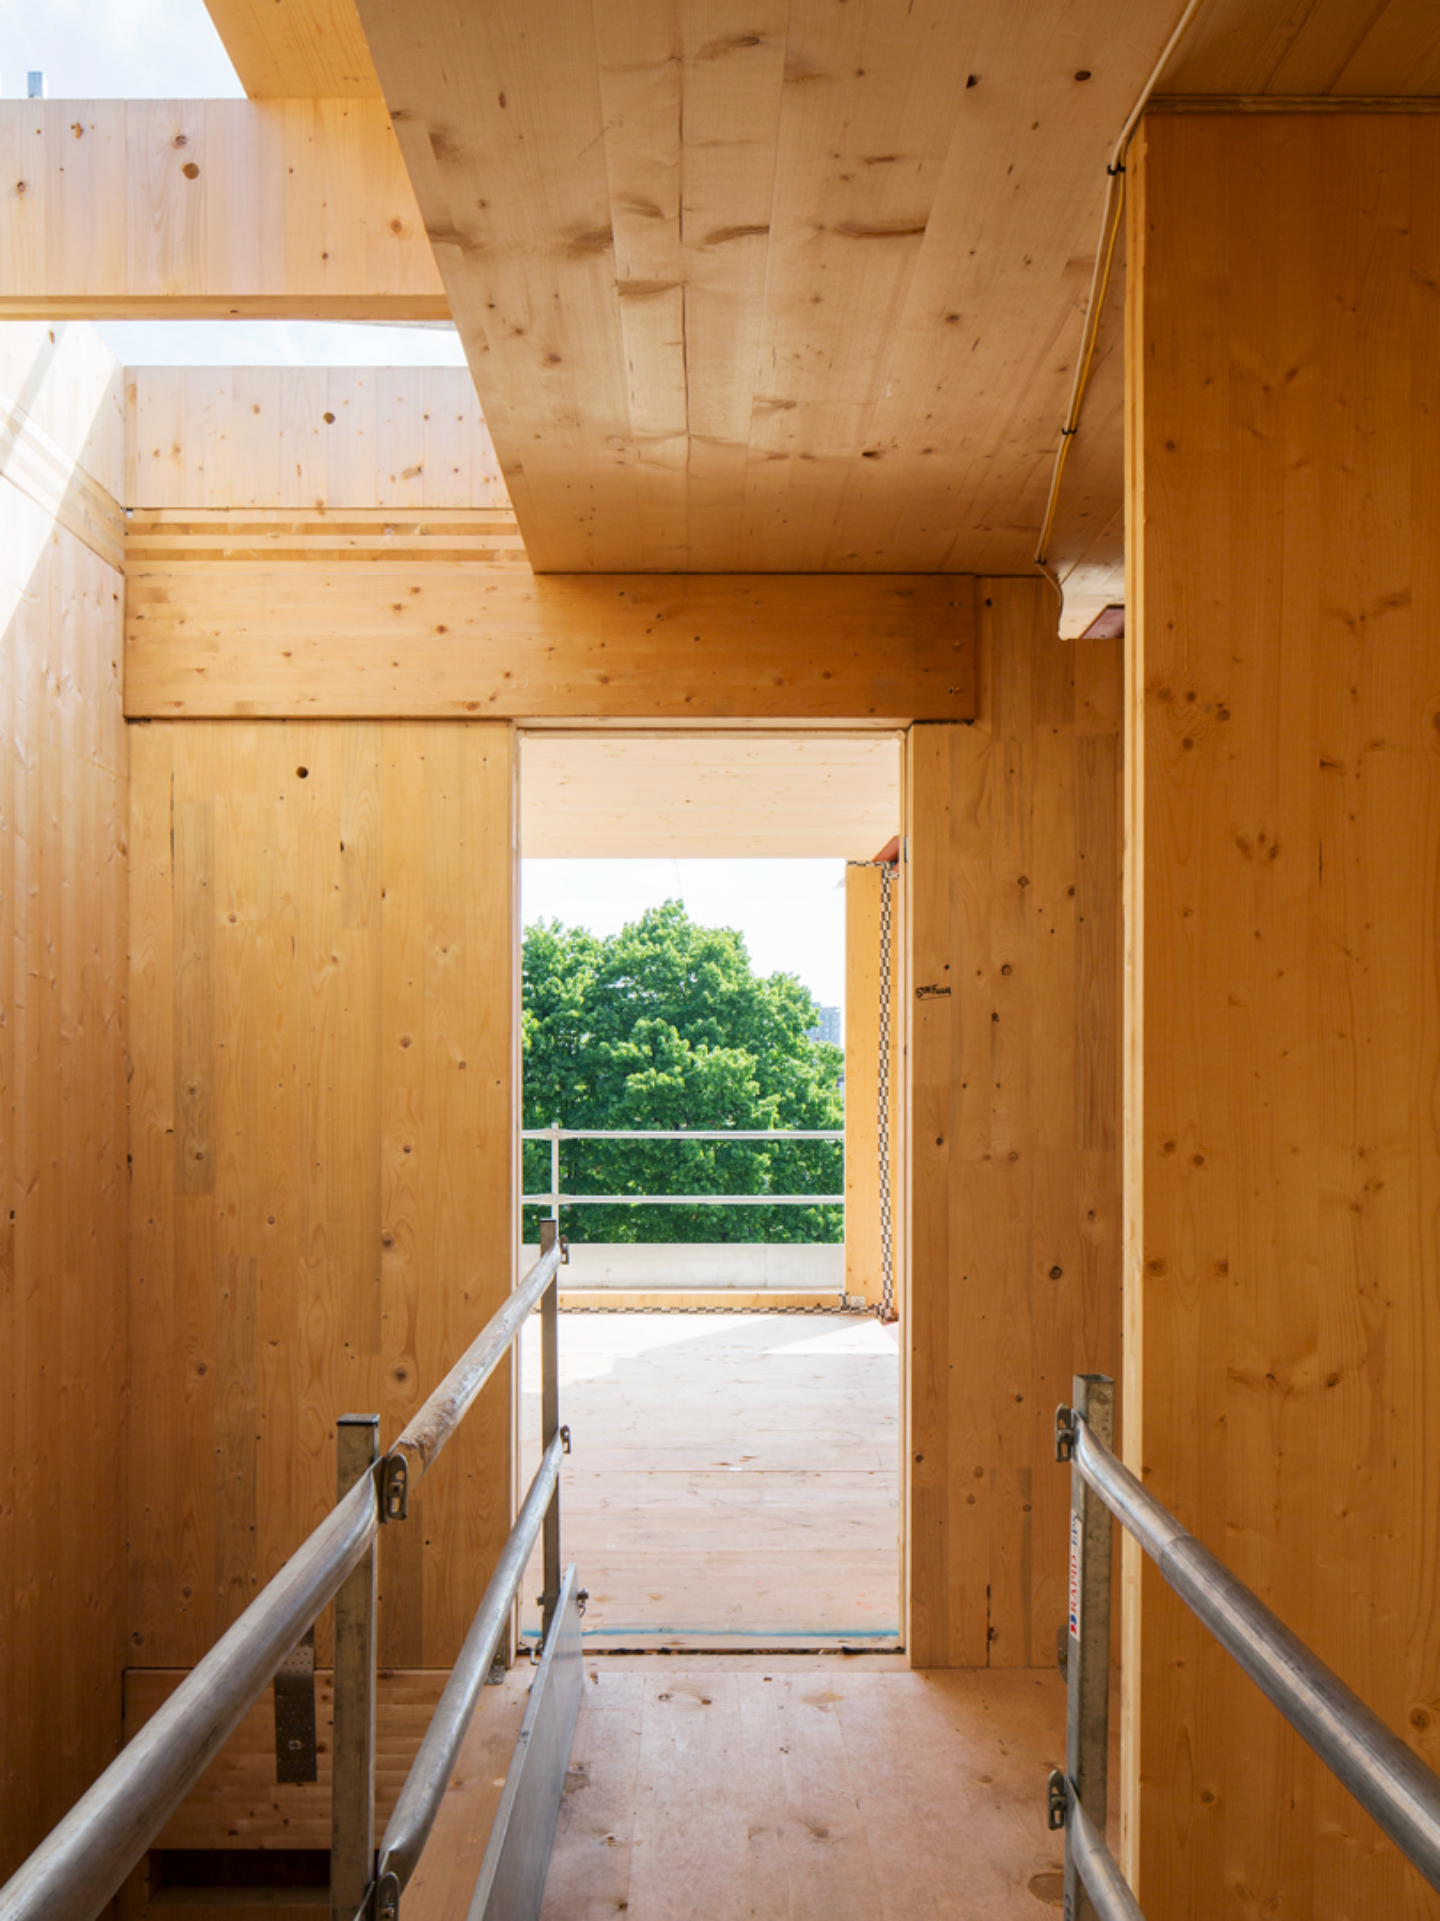 Building with timber: Hoxton Cinema